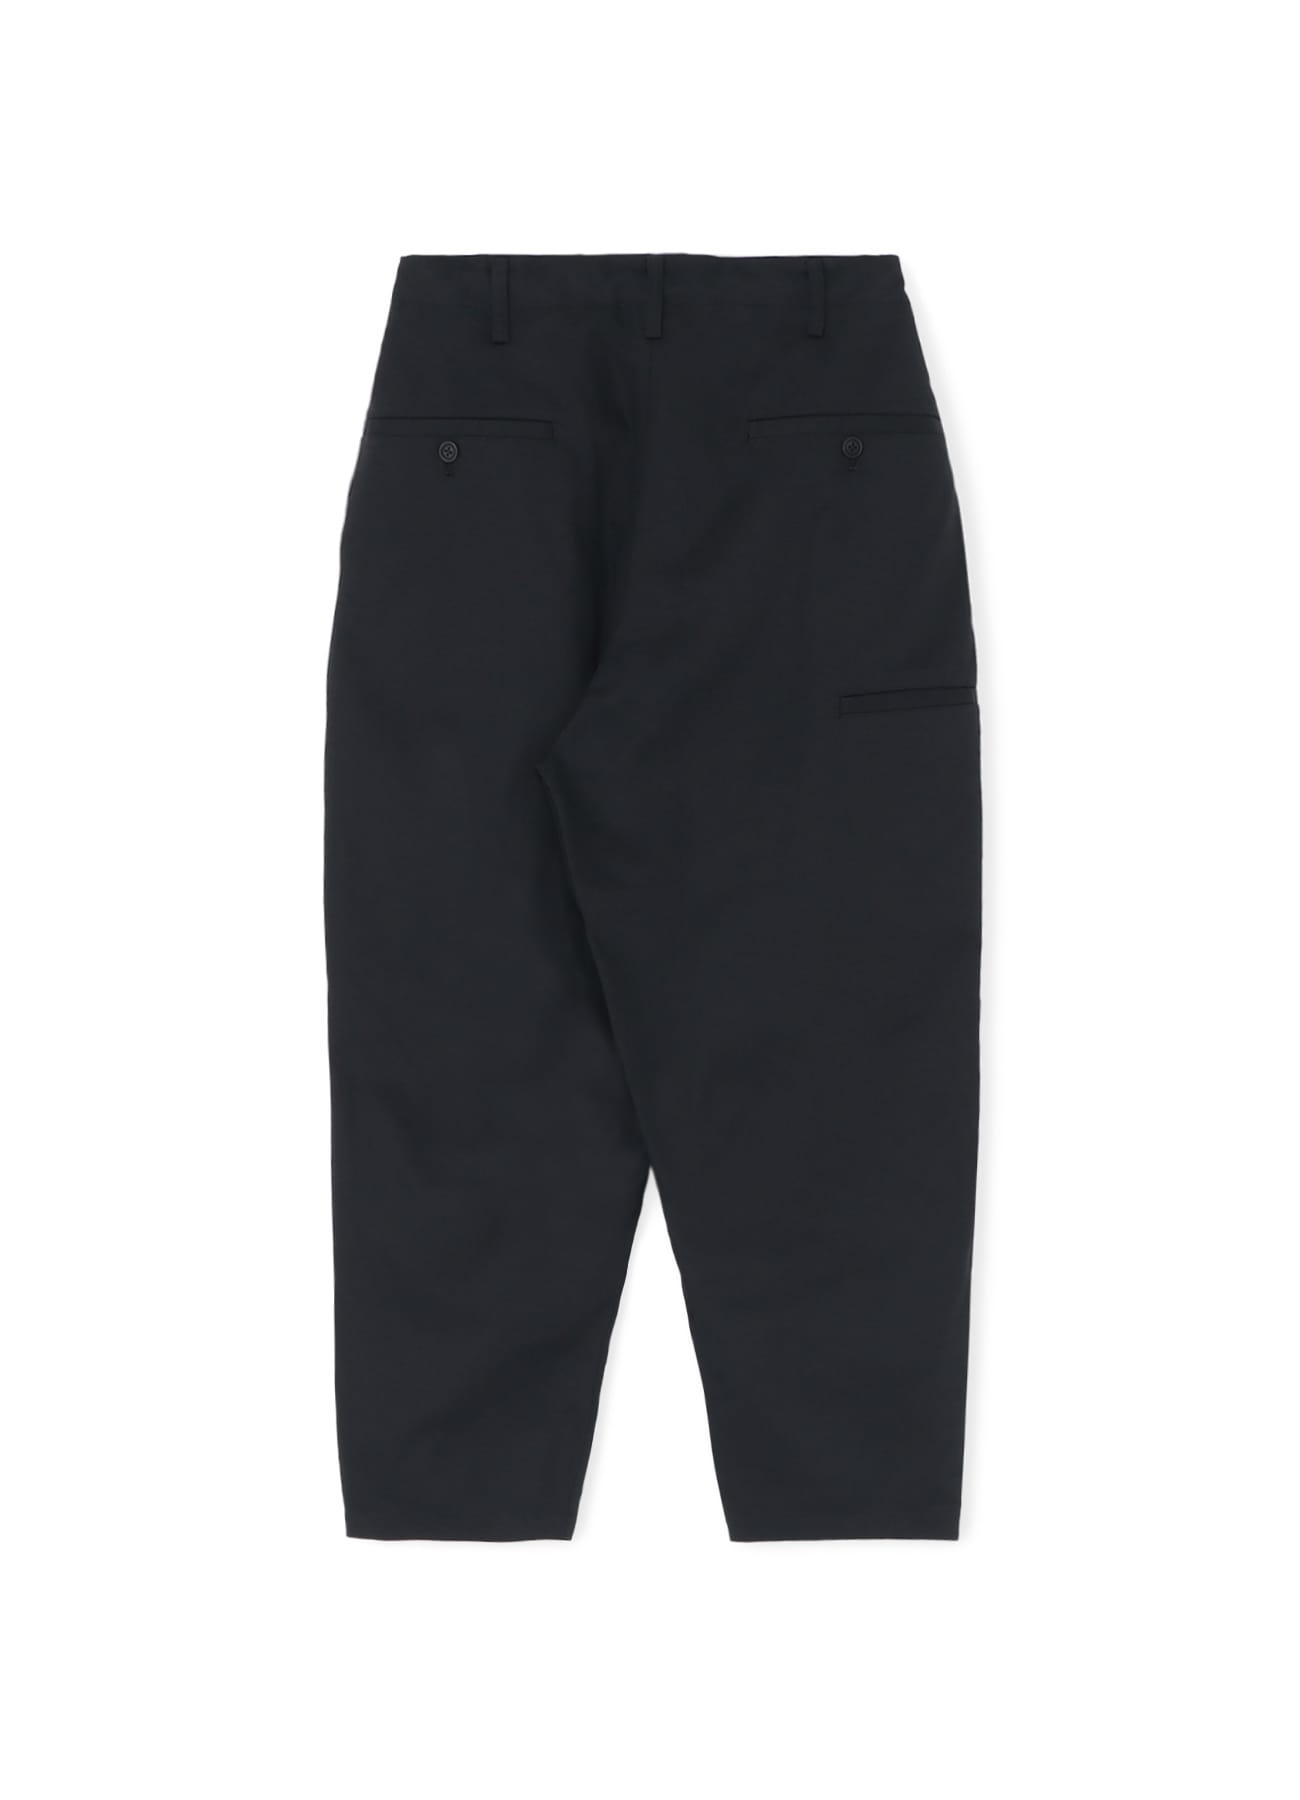 POLYESTER/COTTON TWILL PANTS WITH SIDE POCKET(S BLACK): Y's for